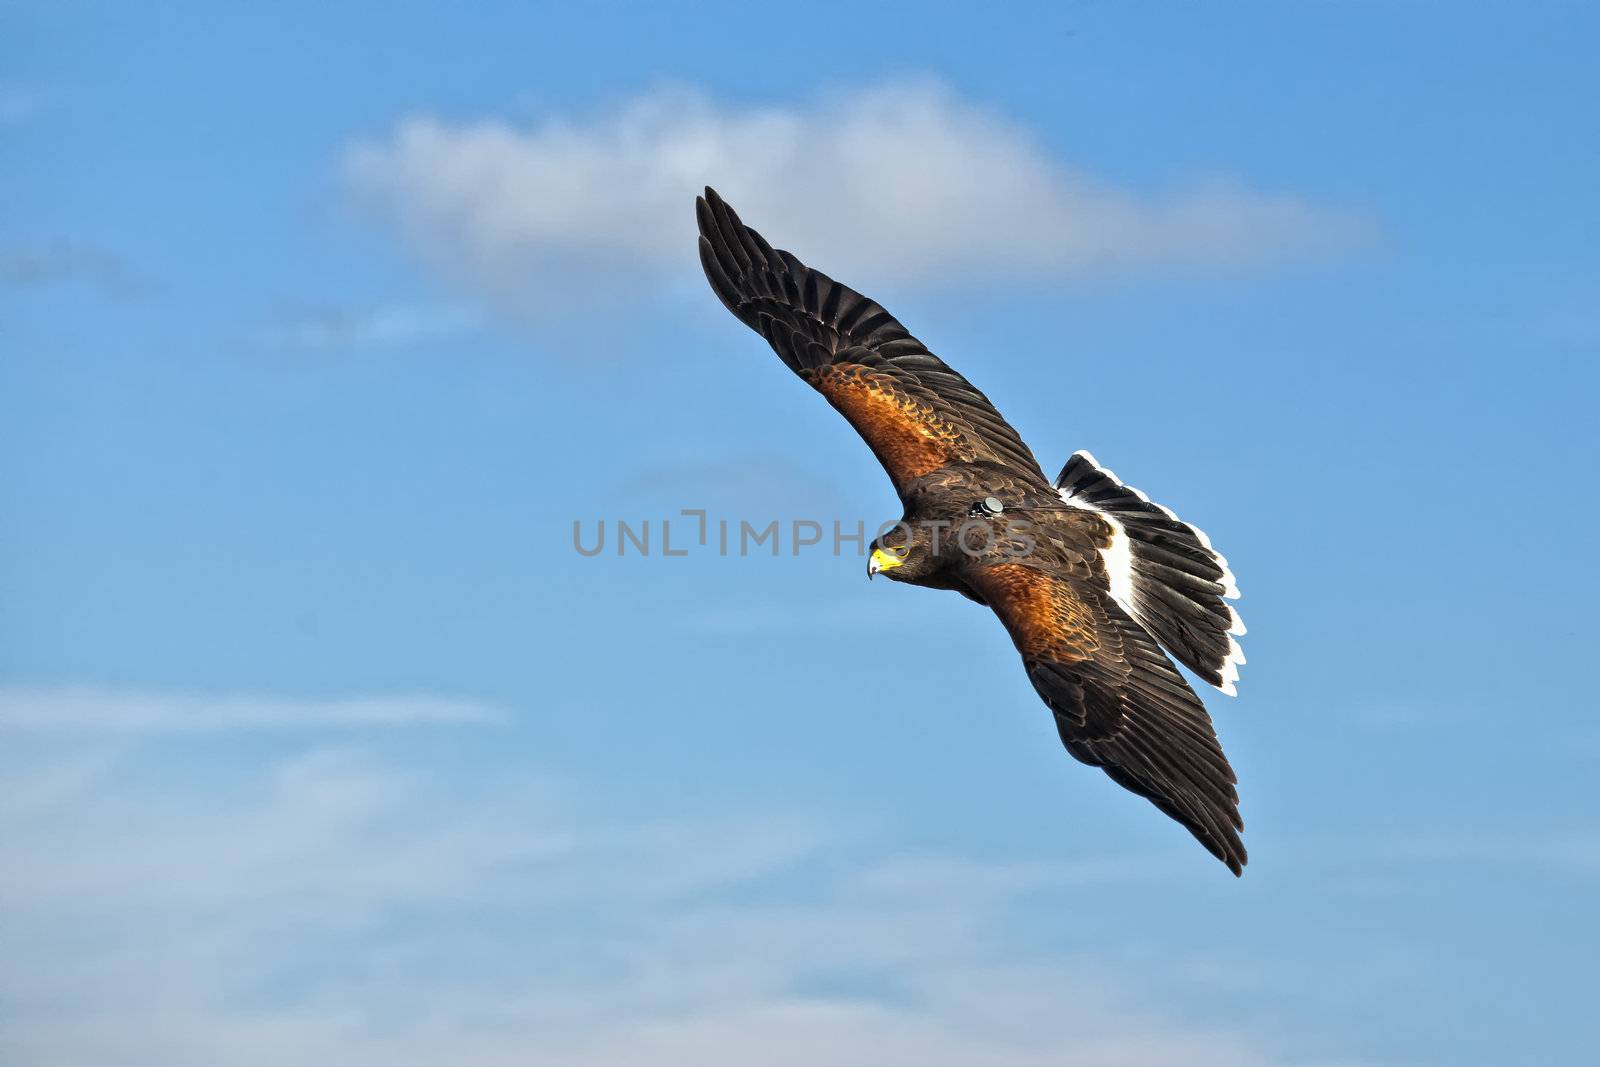 Master of Flight by PhotoWorks